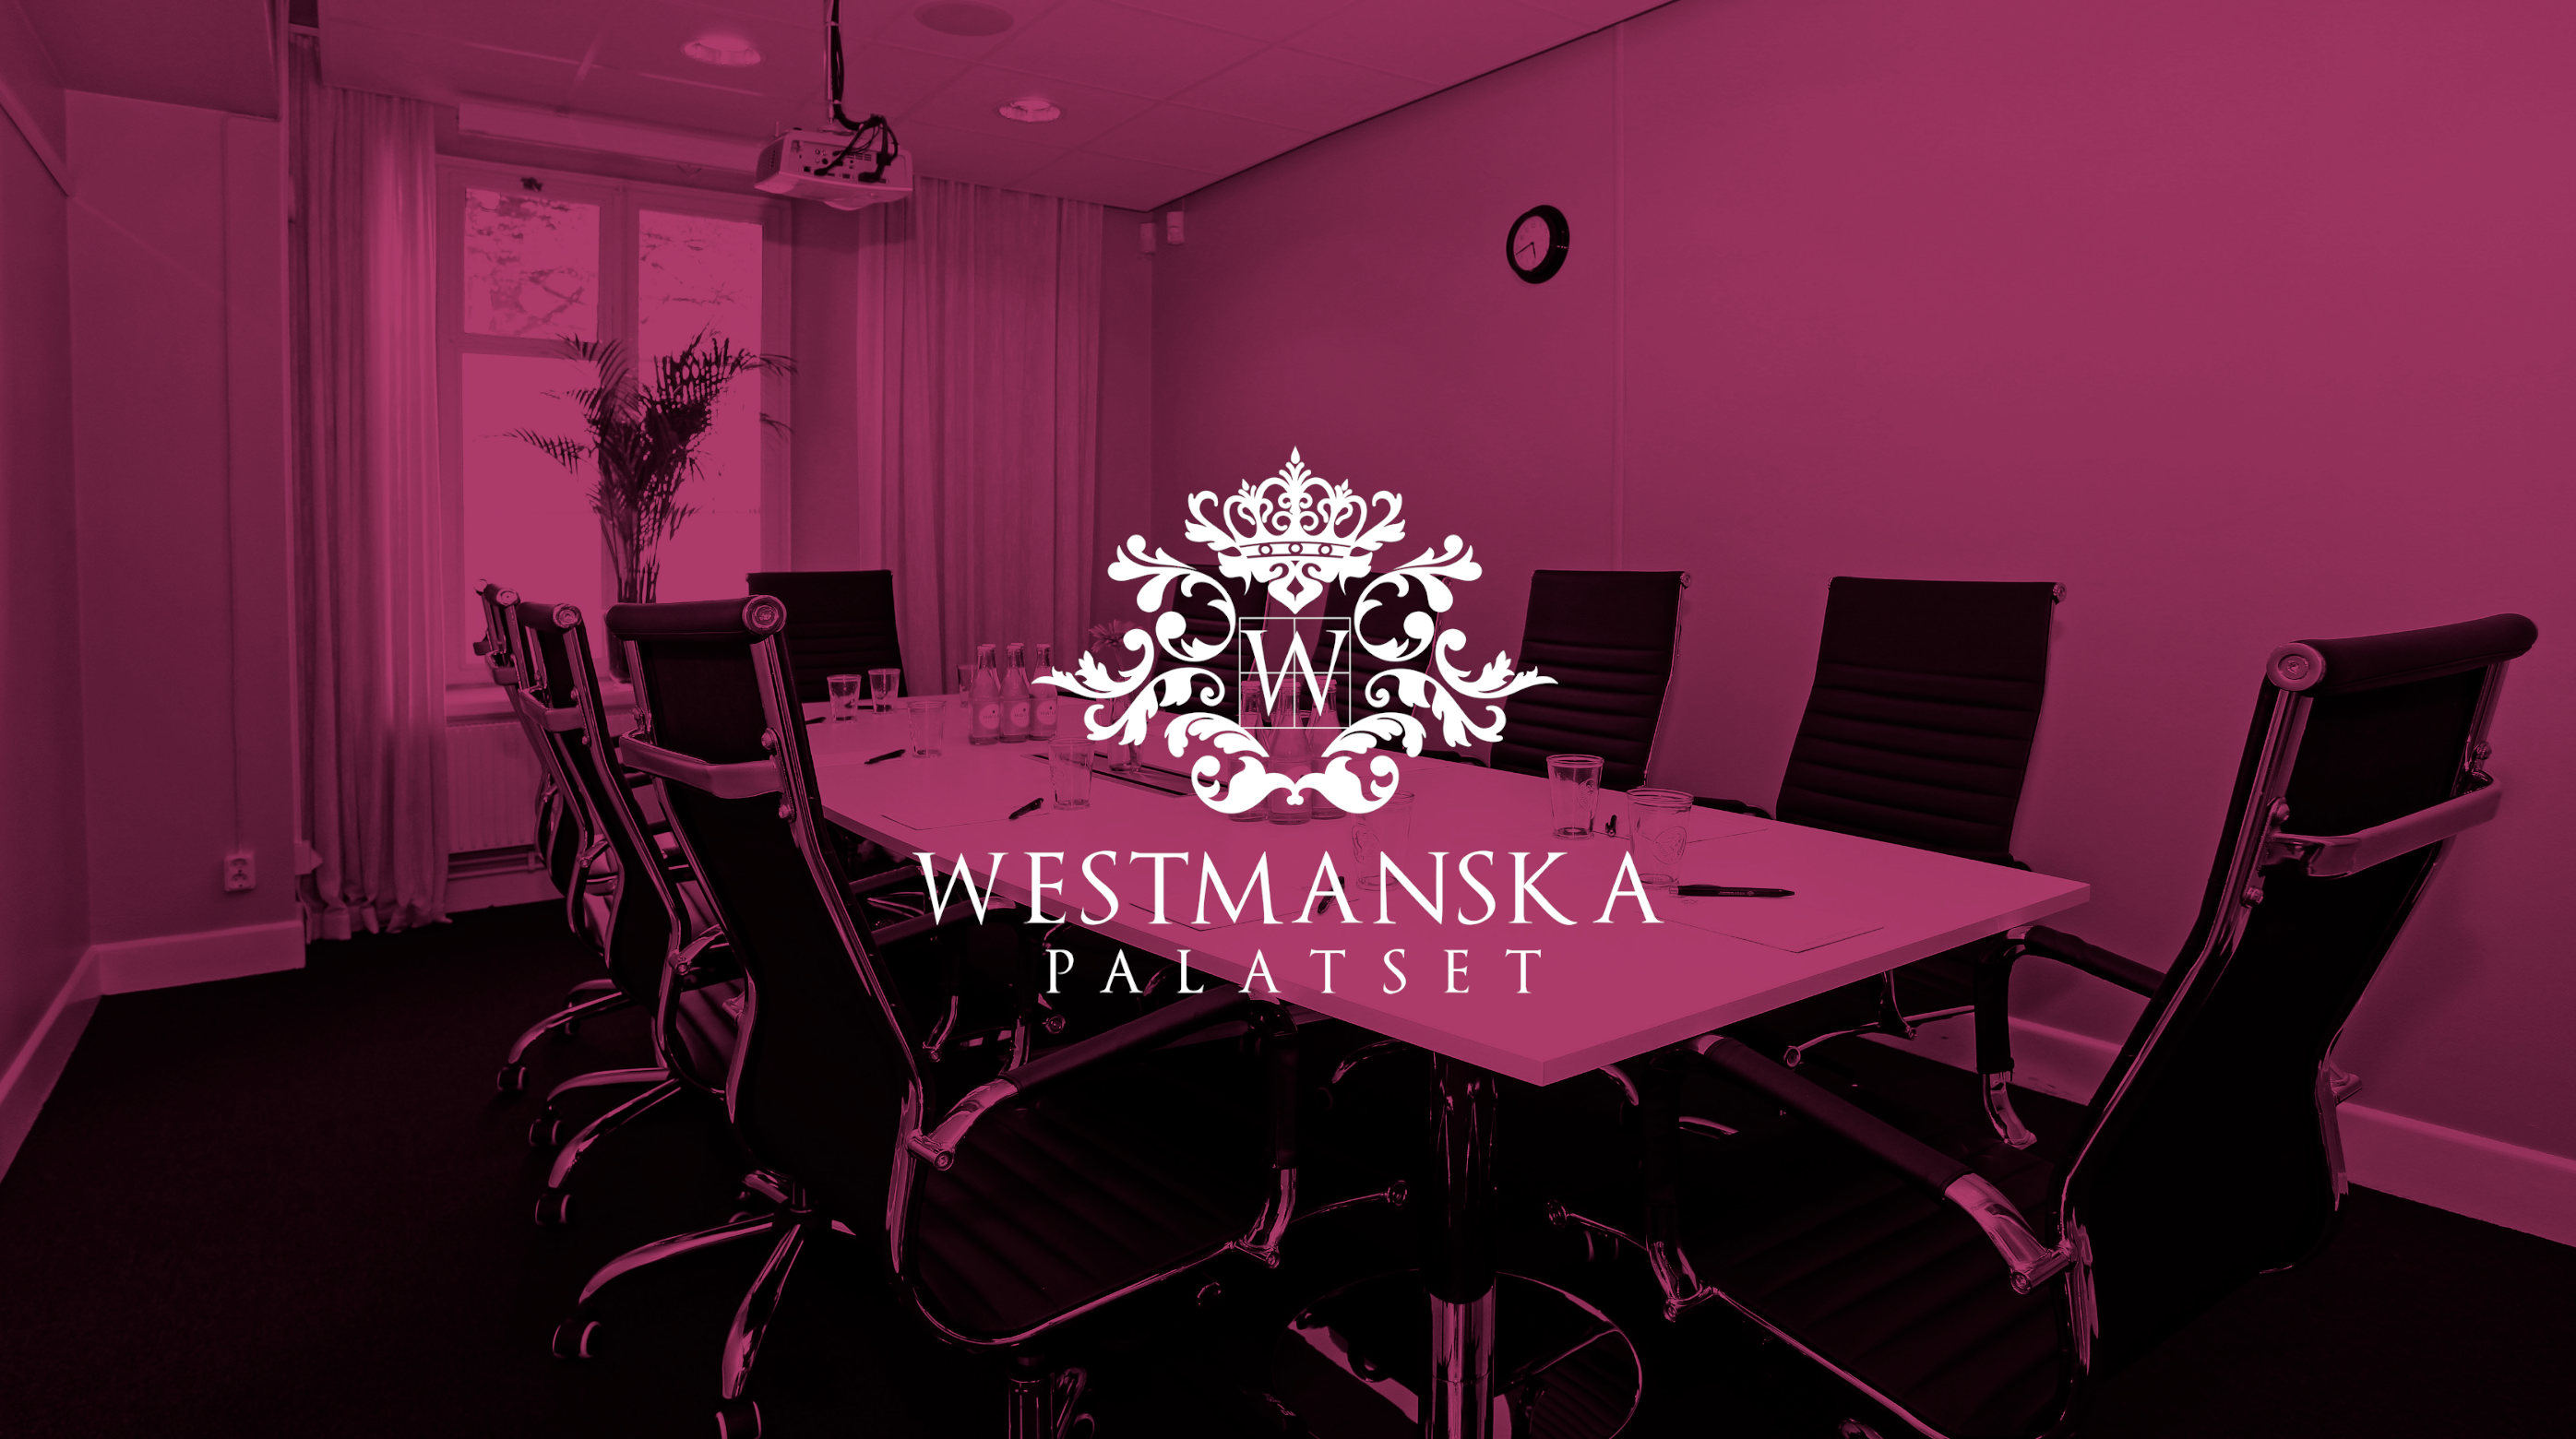 A meeting room with a large table, chairs, and a decorative logo saying "Westmanska Palatset"